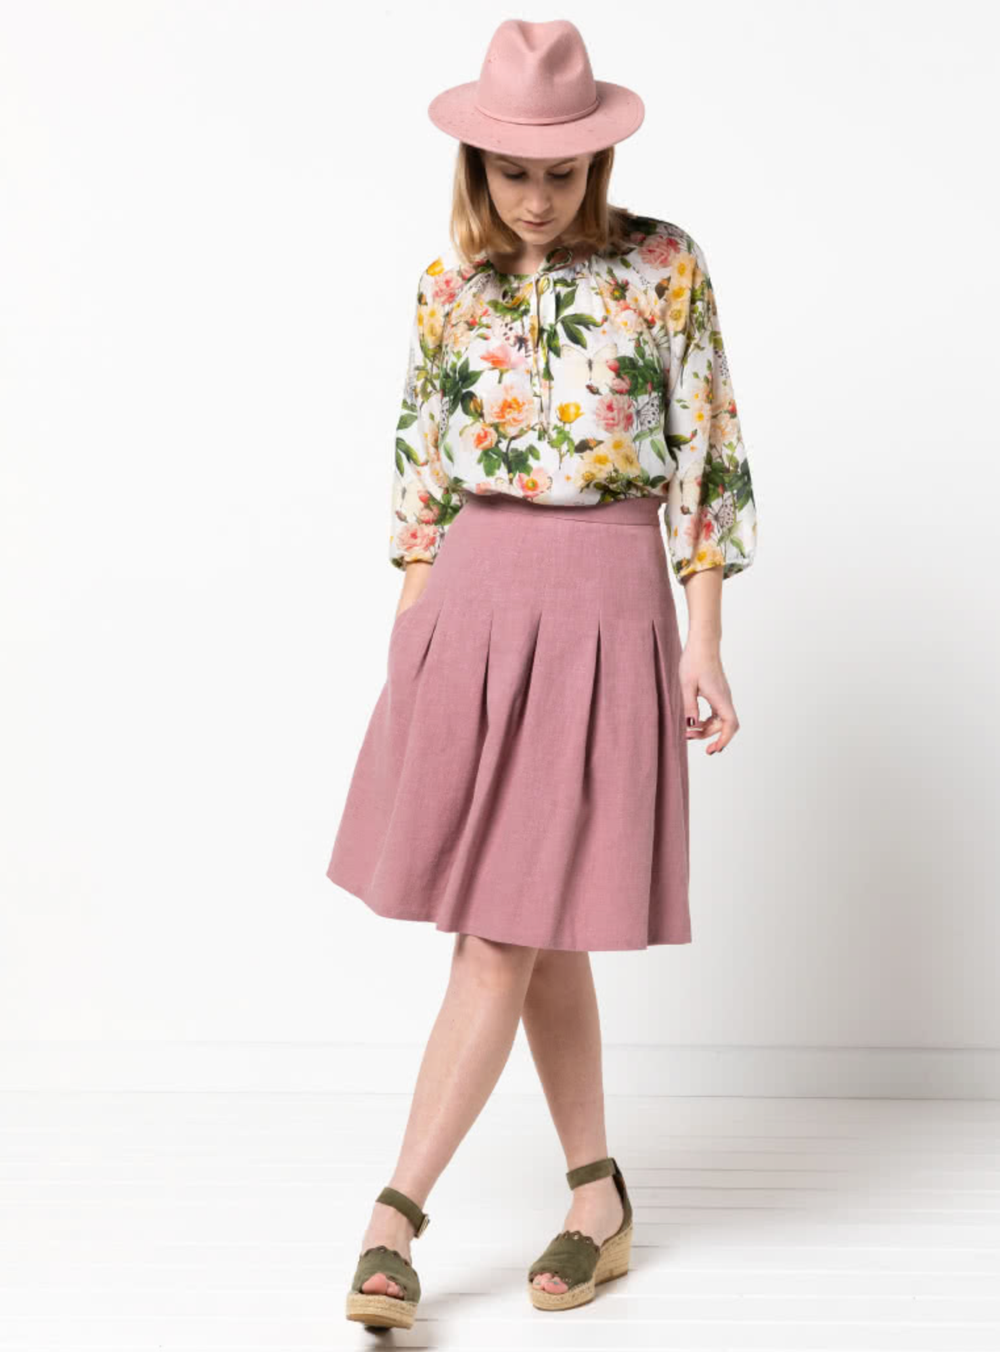 Women wearing the Candice Skirt sewing pattern from Style Arc on The Fold Line. A skirt pattern made in scuba, ponte, linen or cotton fabrics, featuring inverted pleats, side zip, knee length and side pocket.